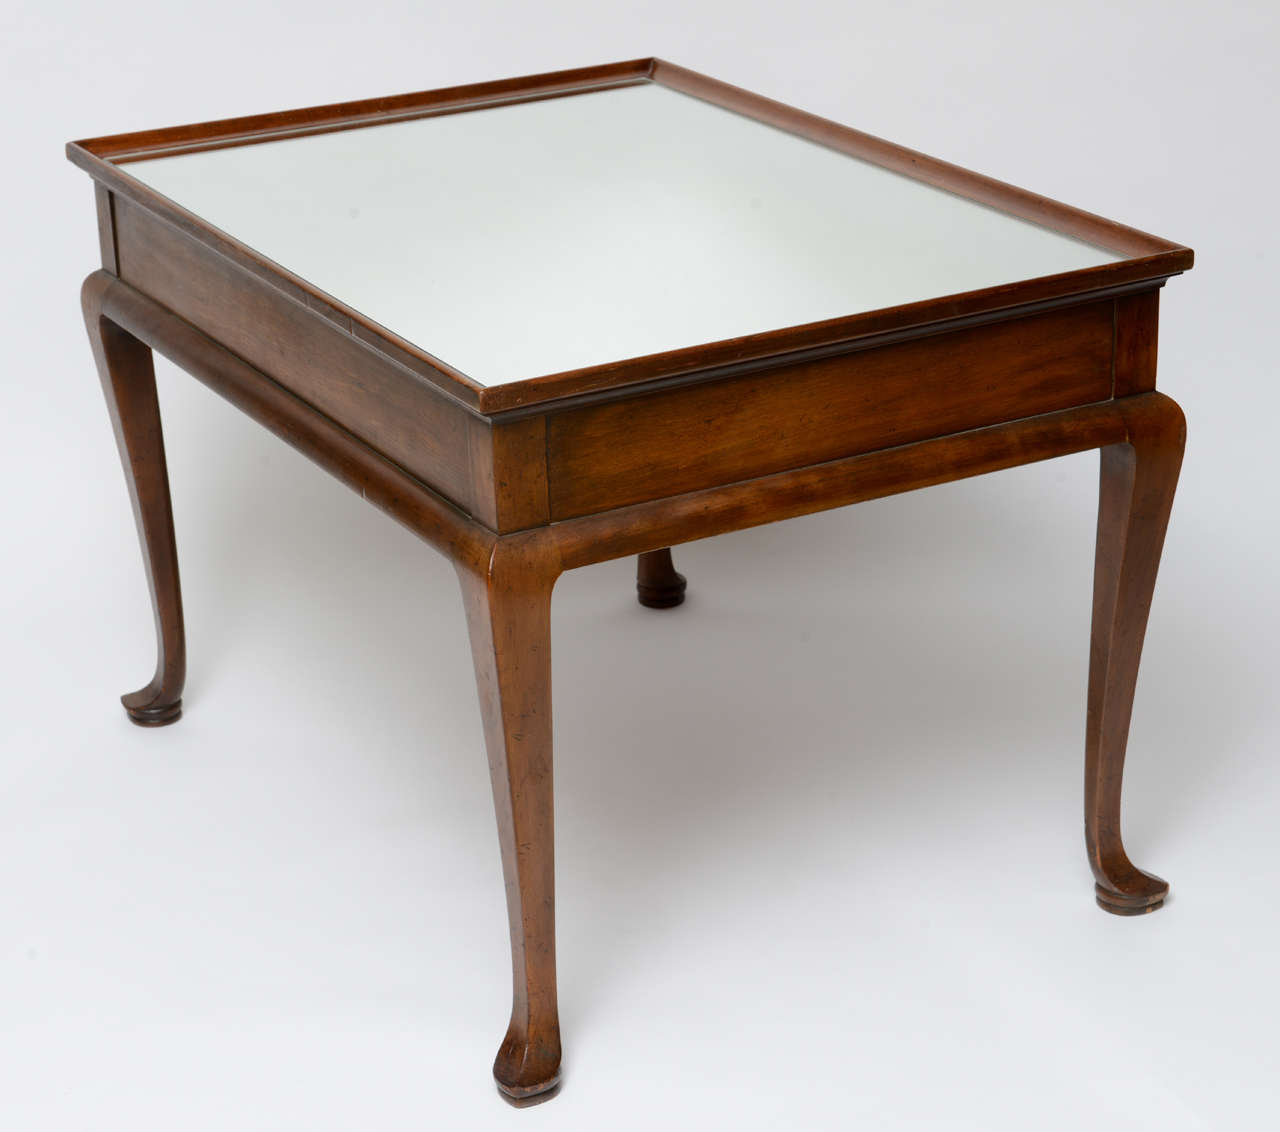 Queen Anne Style Coffee Table by Baker In Good Condition For Sale In West Palm Beach, FL